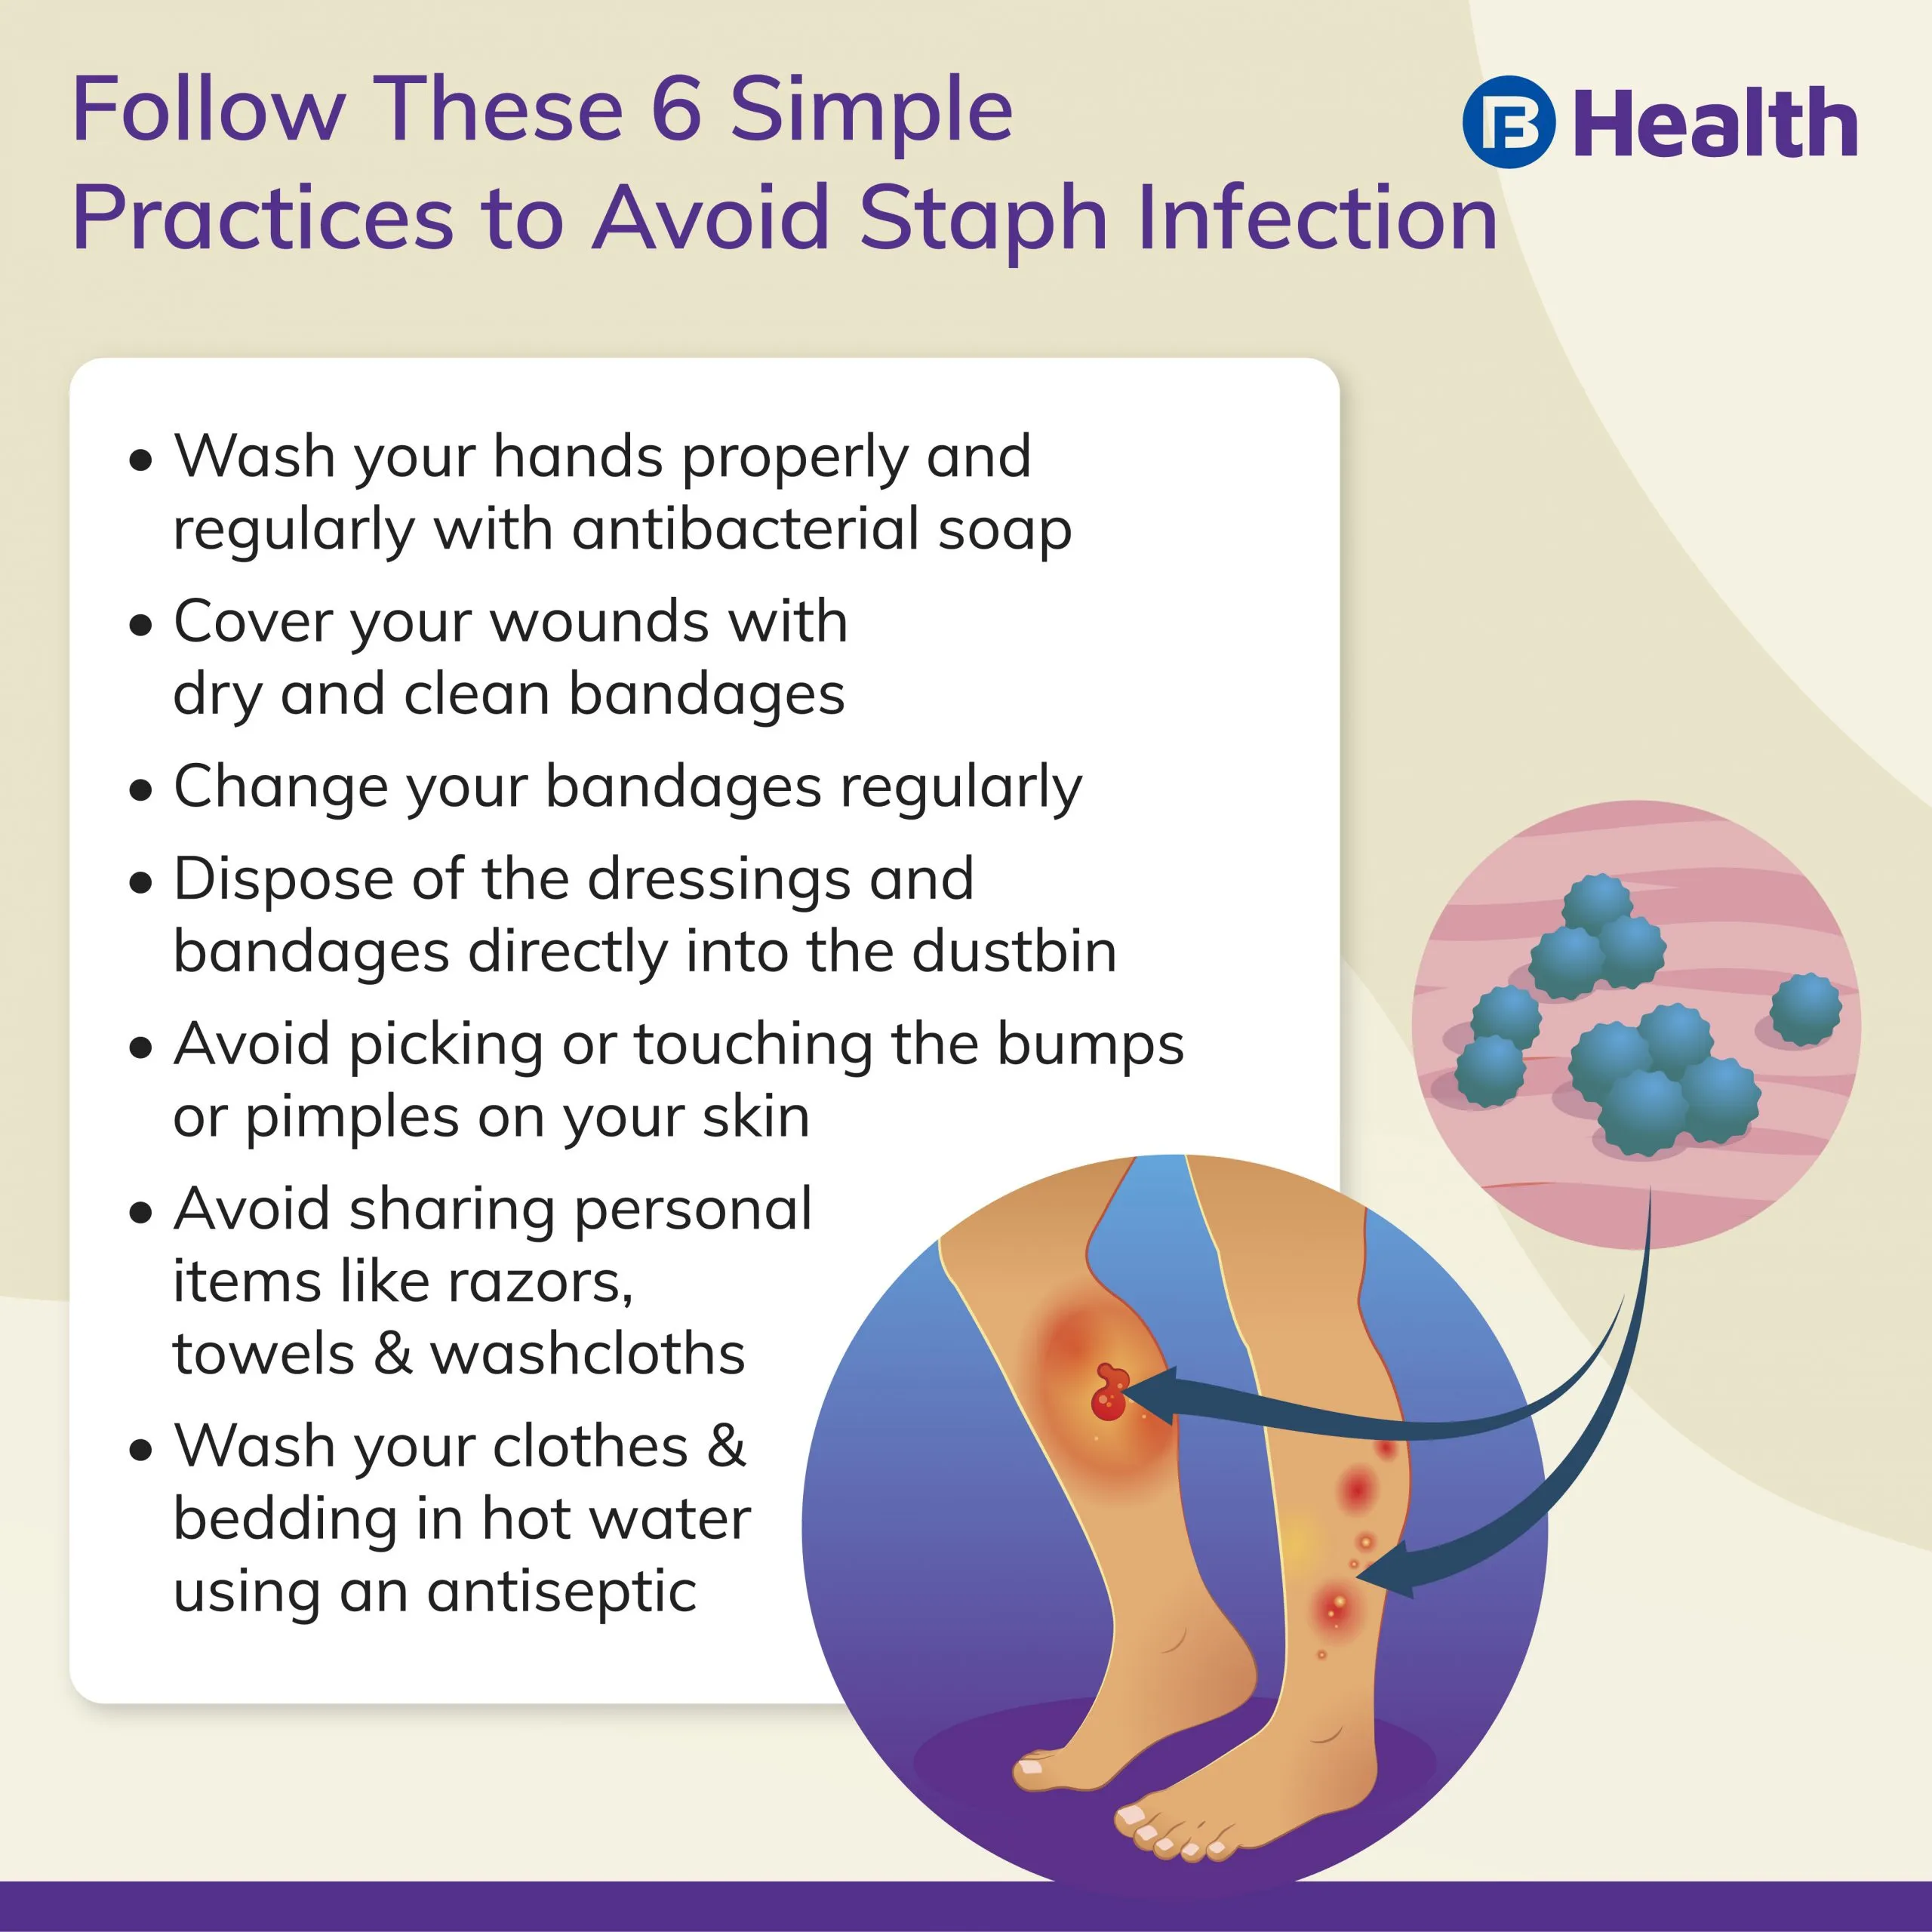 How to avoid Staph Infection